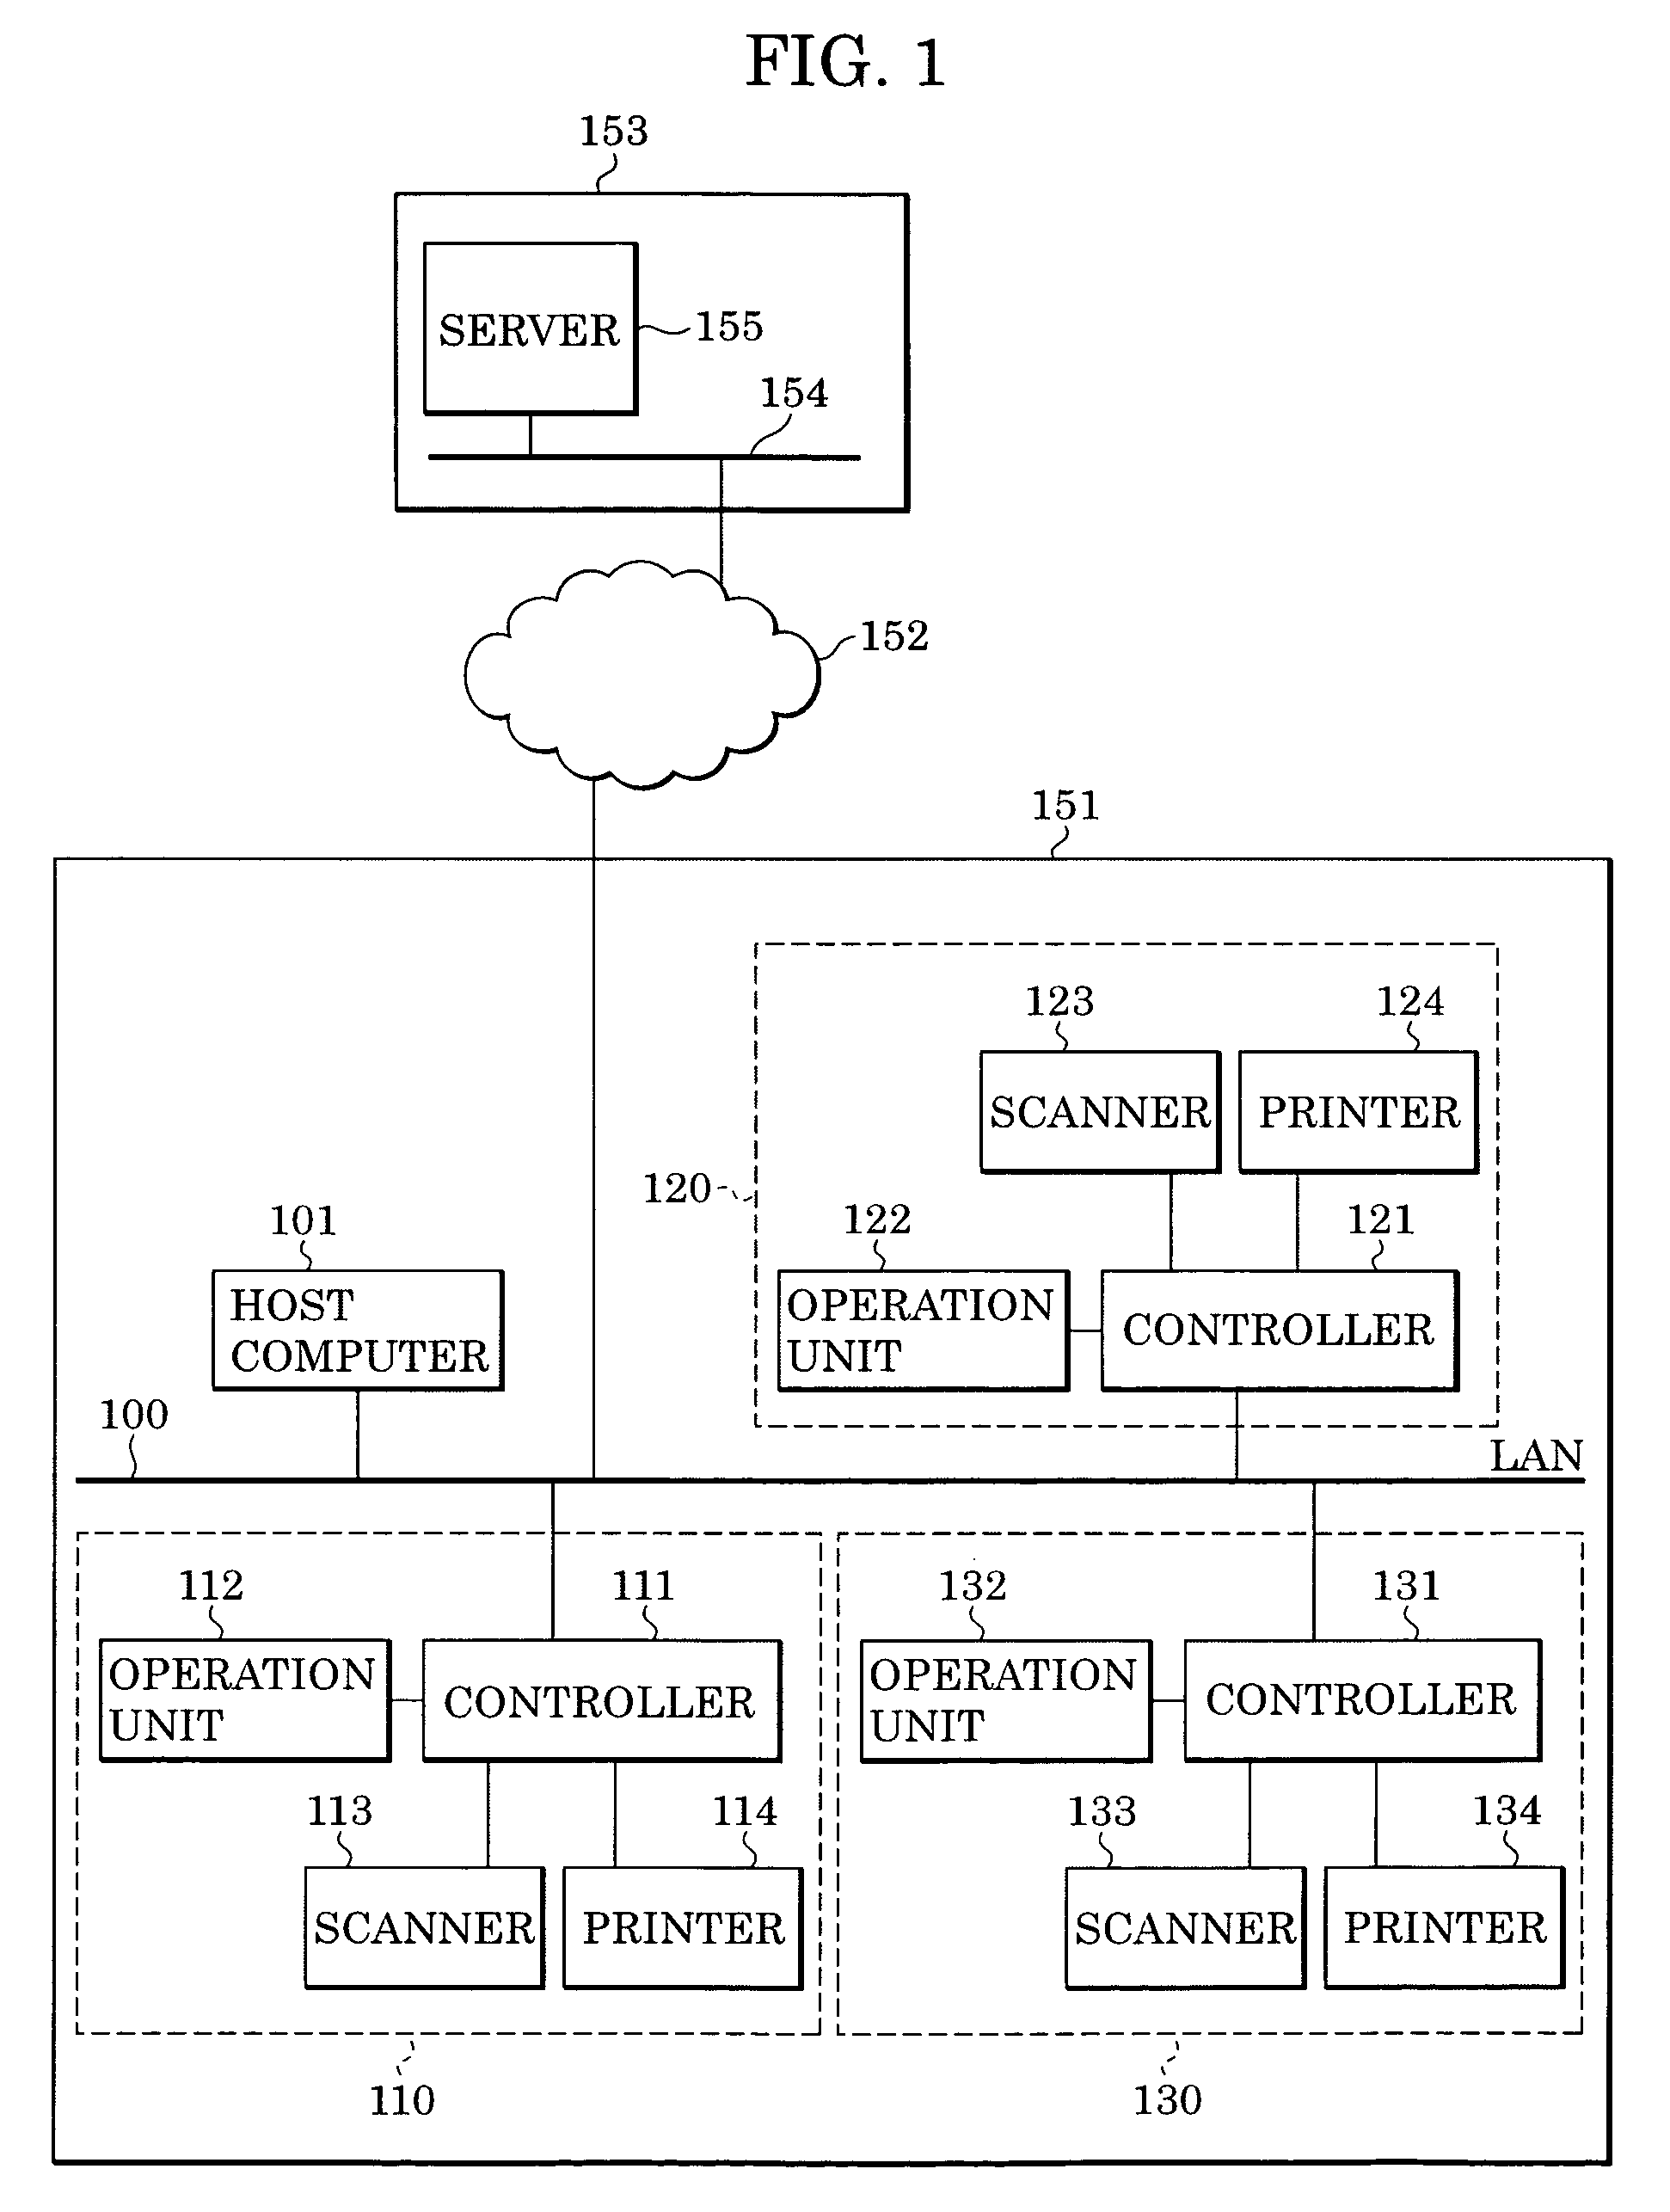 Image processing apparatus, and method for controlling the image processing apparatus to process displayable and non-displayable data received from a server